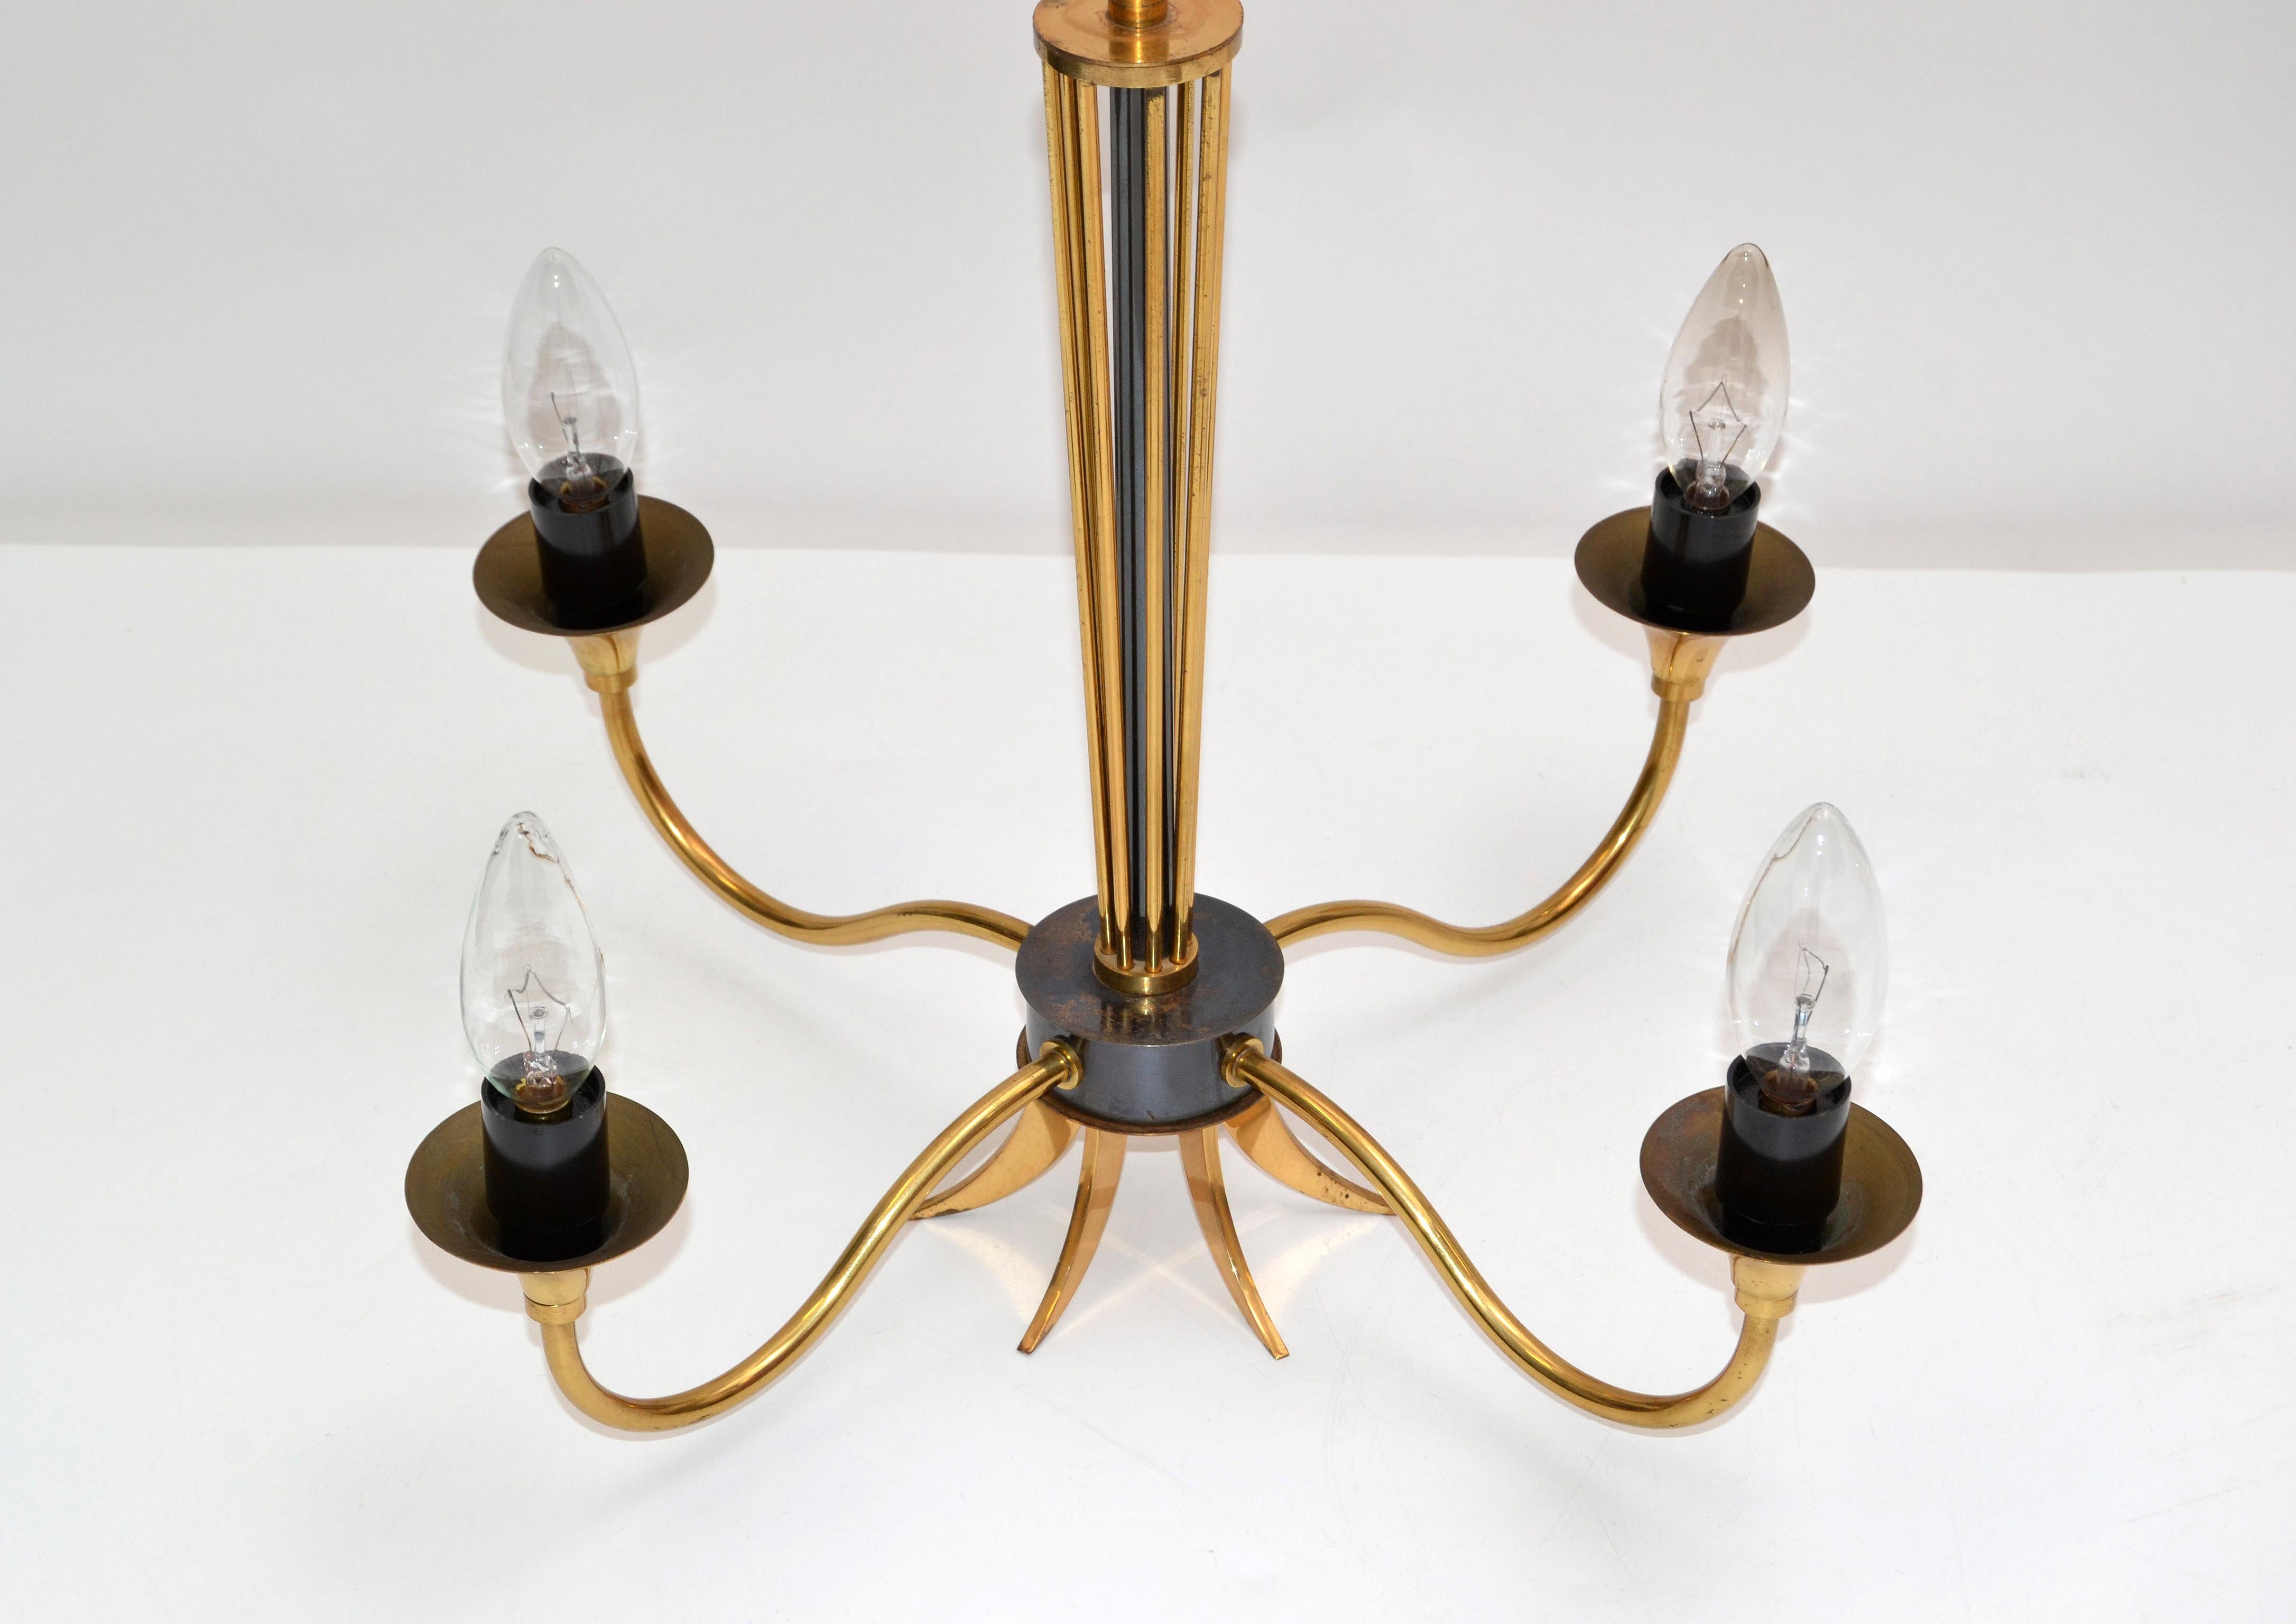 Maison Lunel Four-Light Chandelier Brass and Gun Metal French Mid-Century Modern For Sale 3